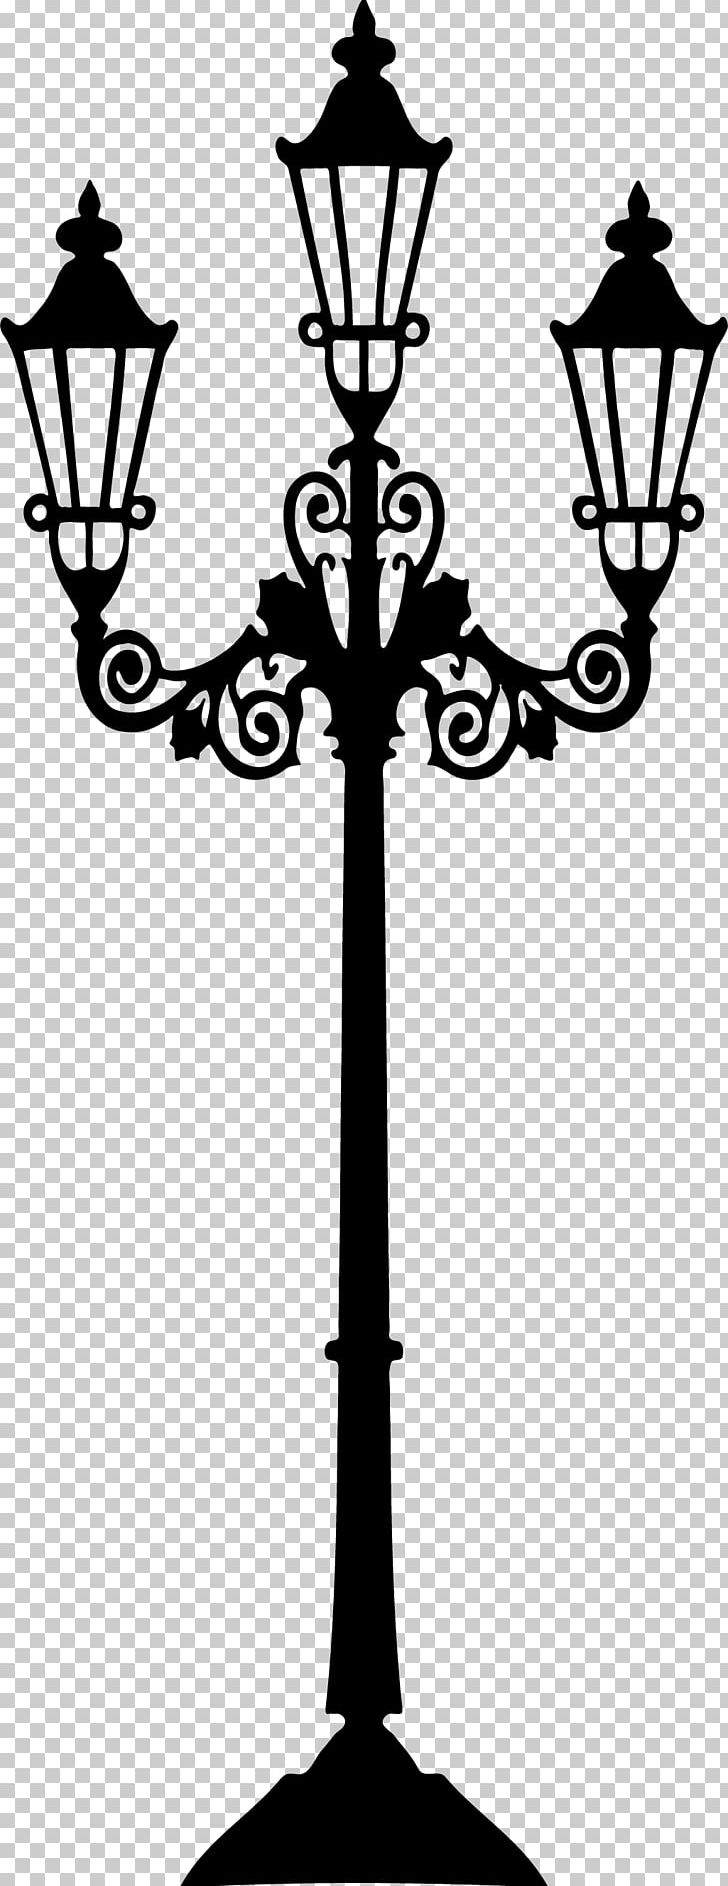 Street Light Lighting Light Fixture PNG, Clipart, Branch, Candle Holder, Clip, Cross, Decor Free PNG Download